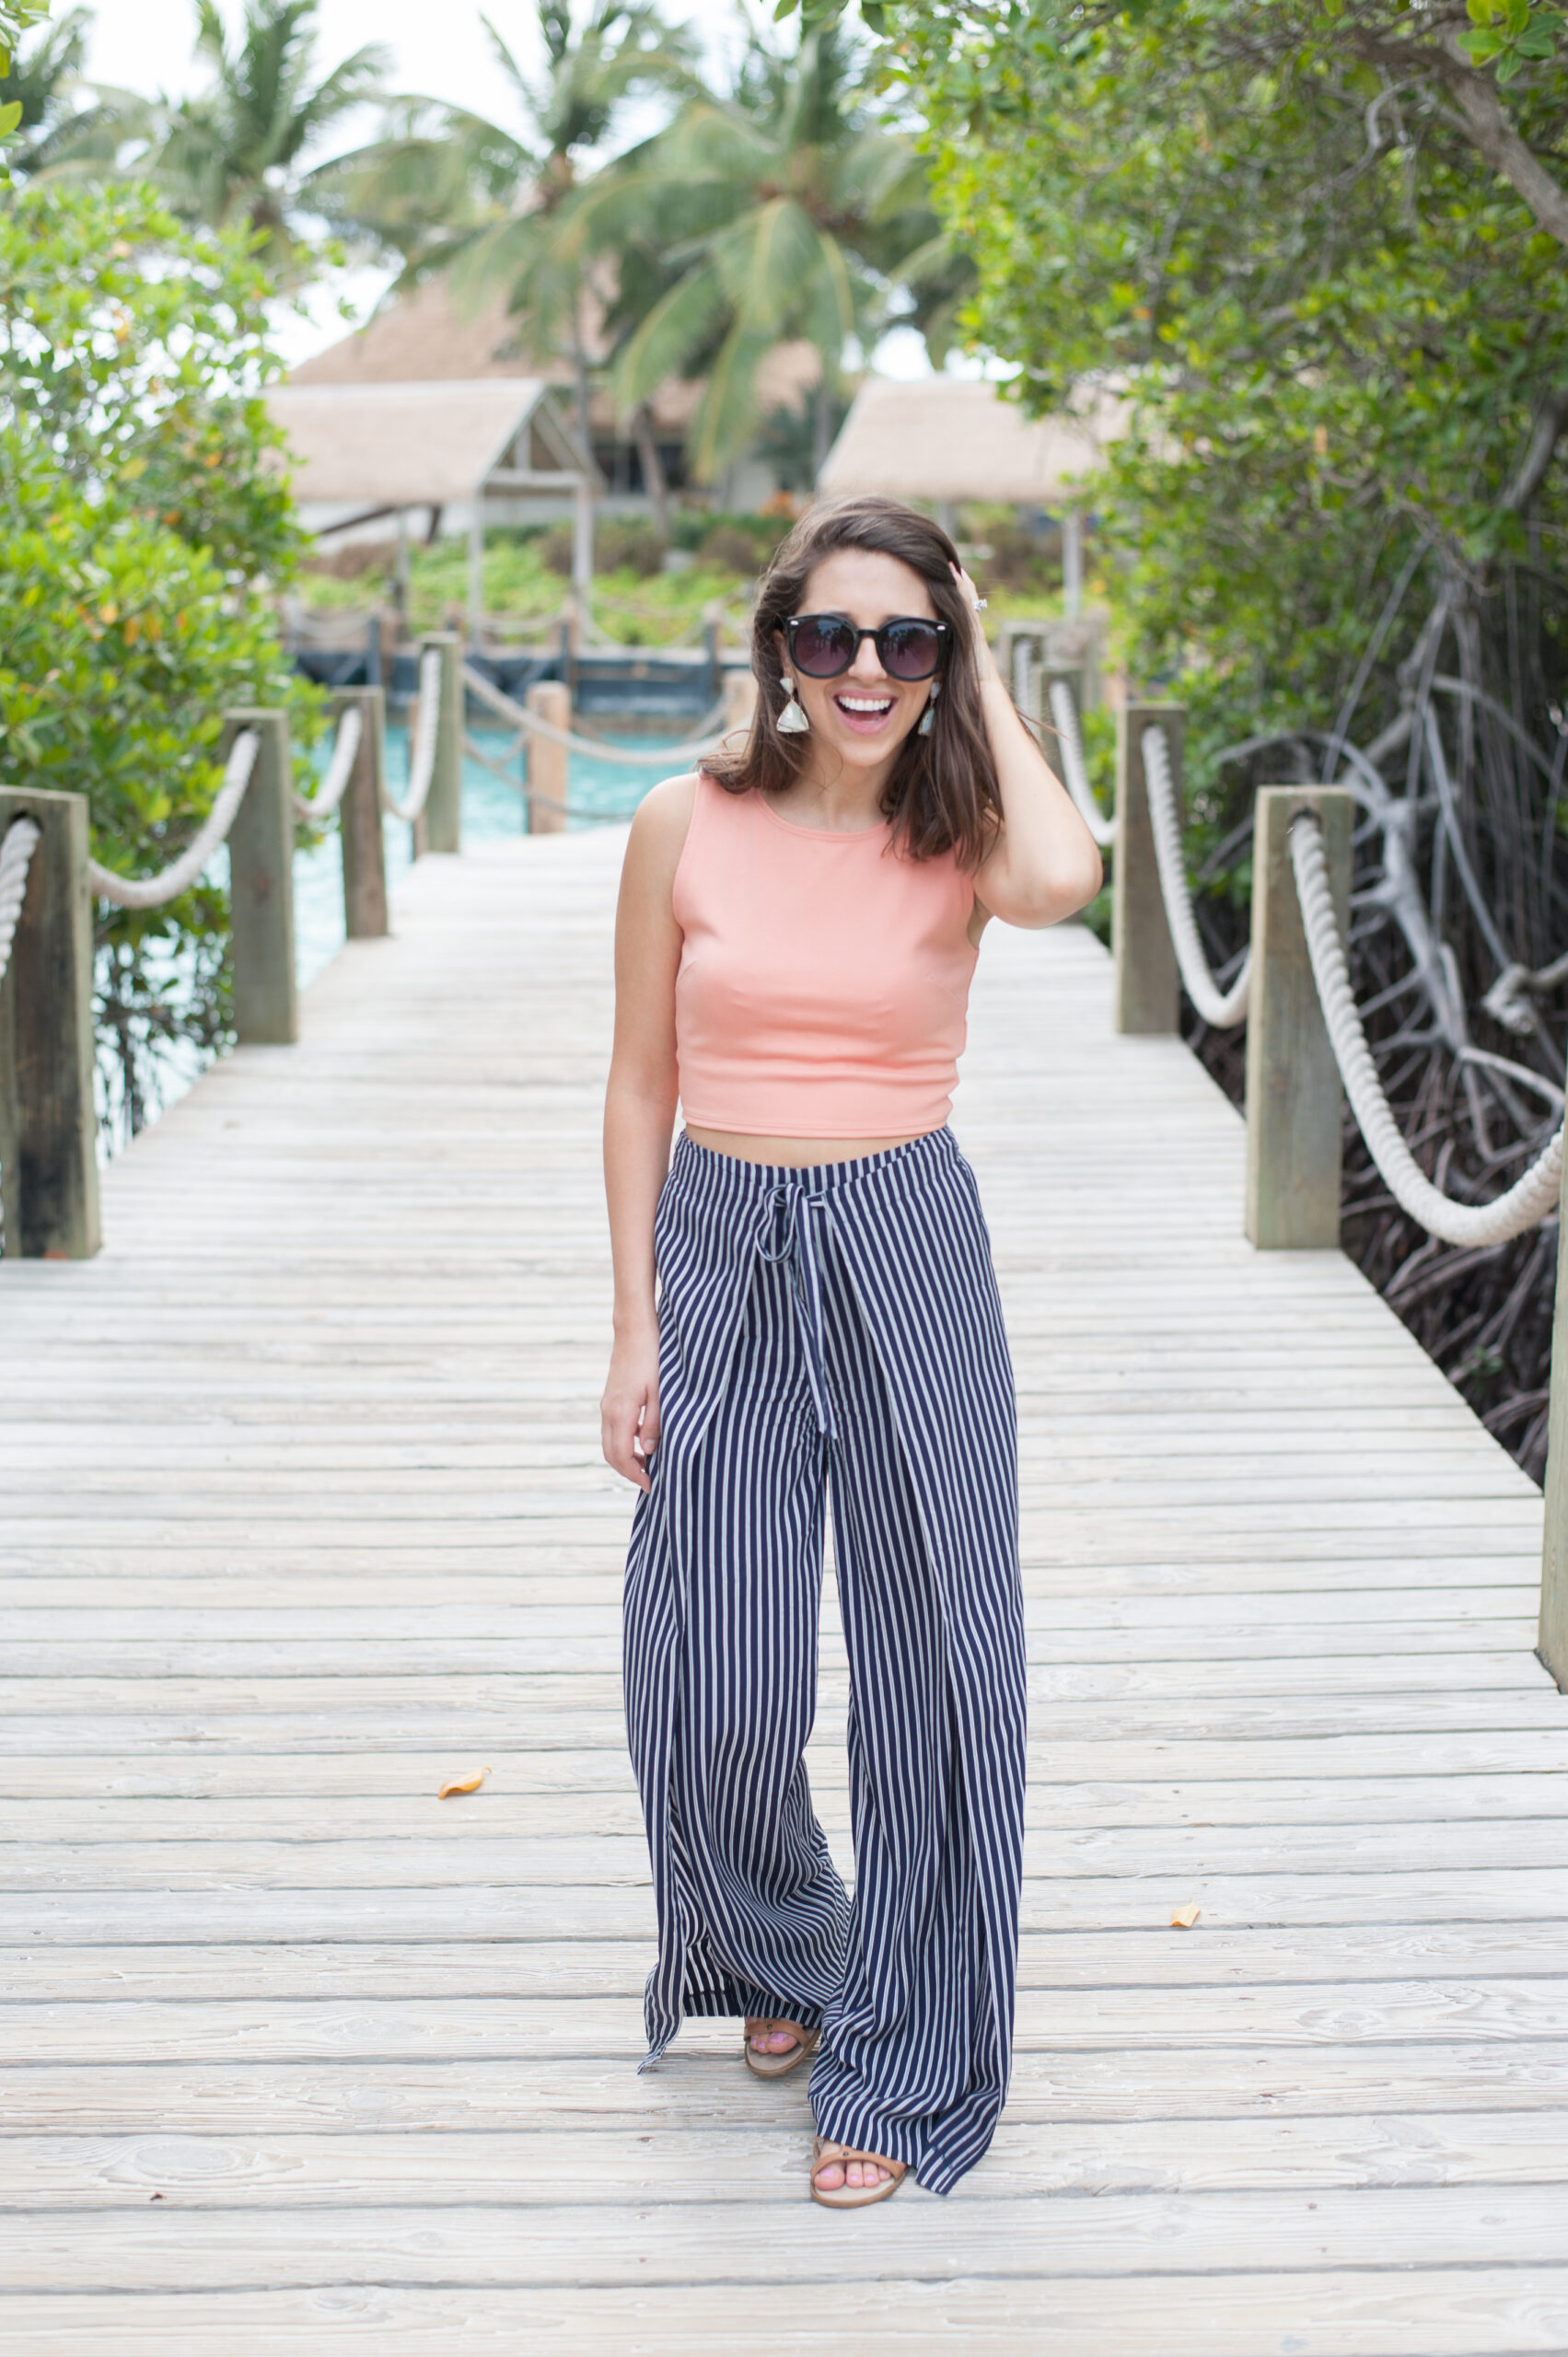 Dress Up Buttercup // A Houston-based fashion and inspiration blog developed to daily inspire your own personal style by Dede Raad | Aruba Renaissance Island